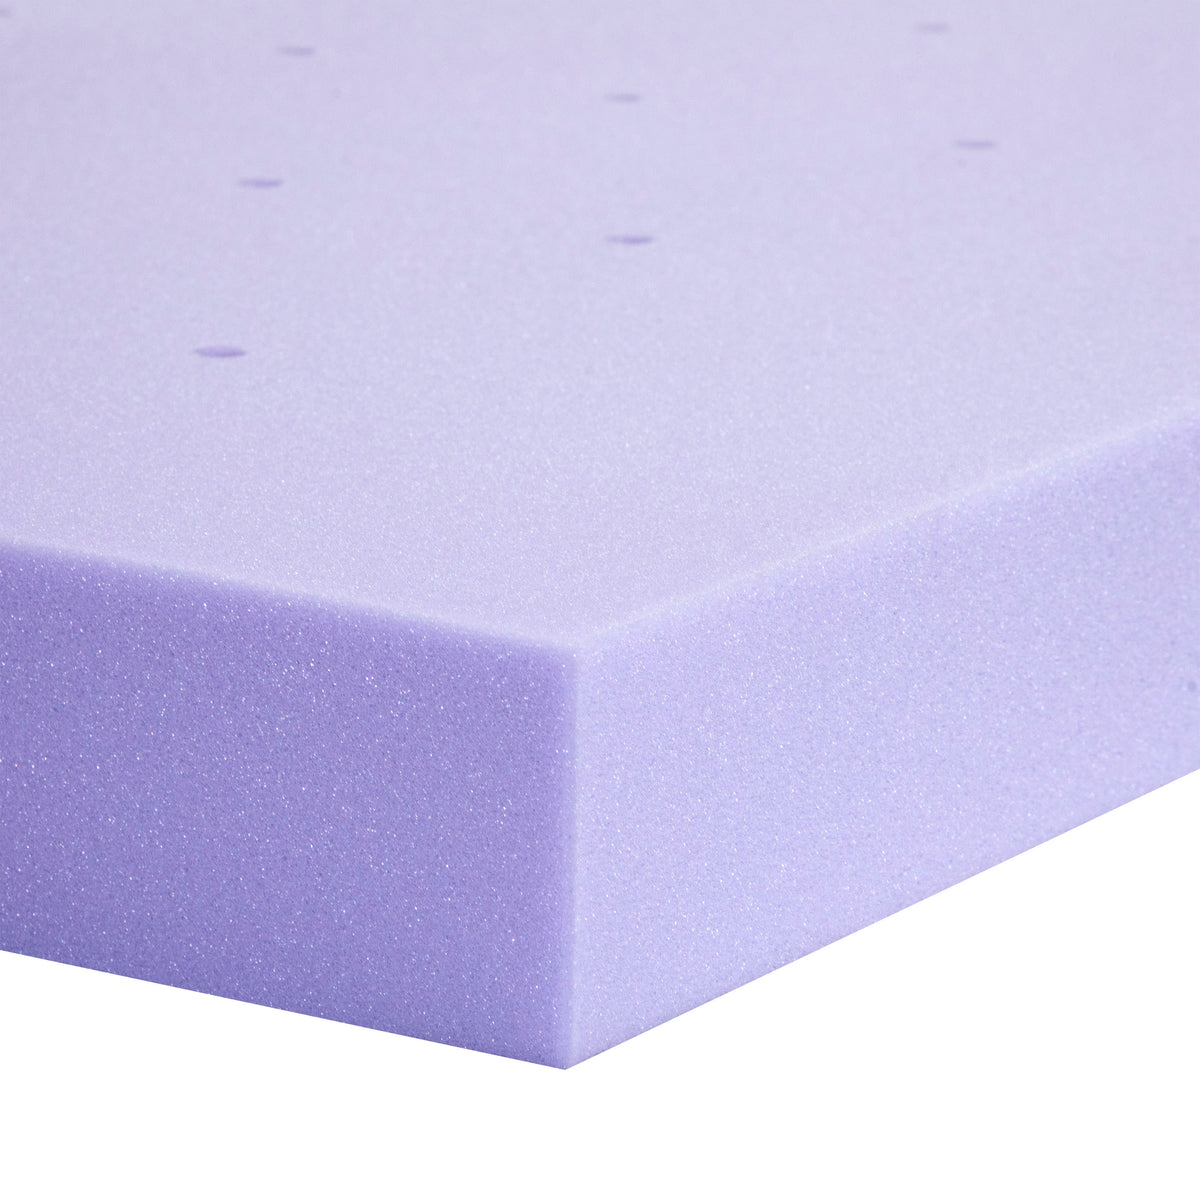 Twin XL |#| 3" Lavender Infused Memory Foam Mattress Topper with Ventilated Design - Twin XL